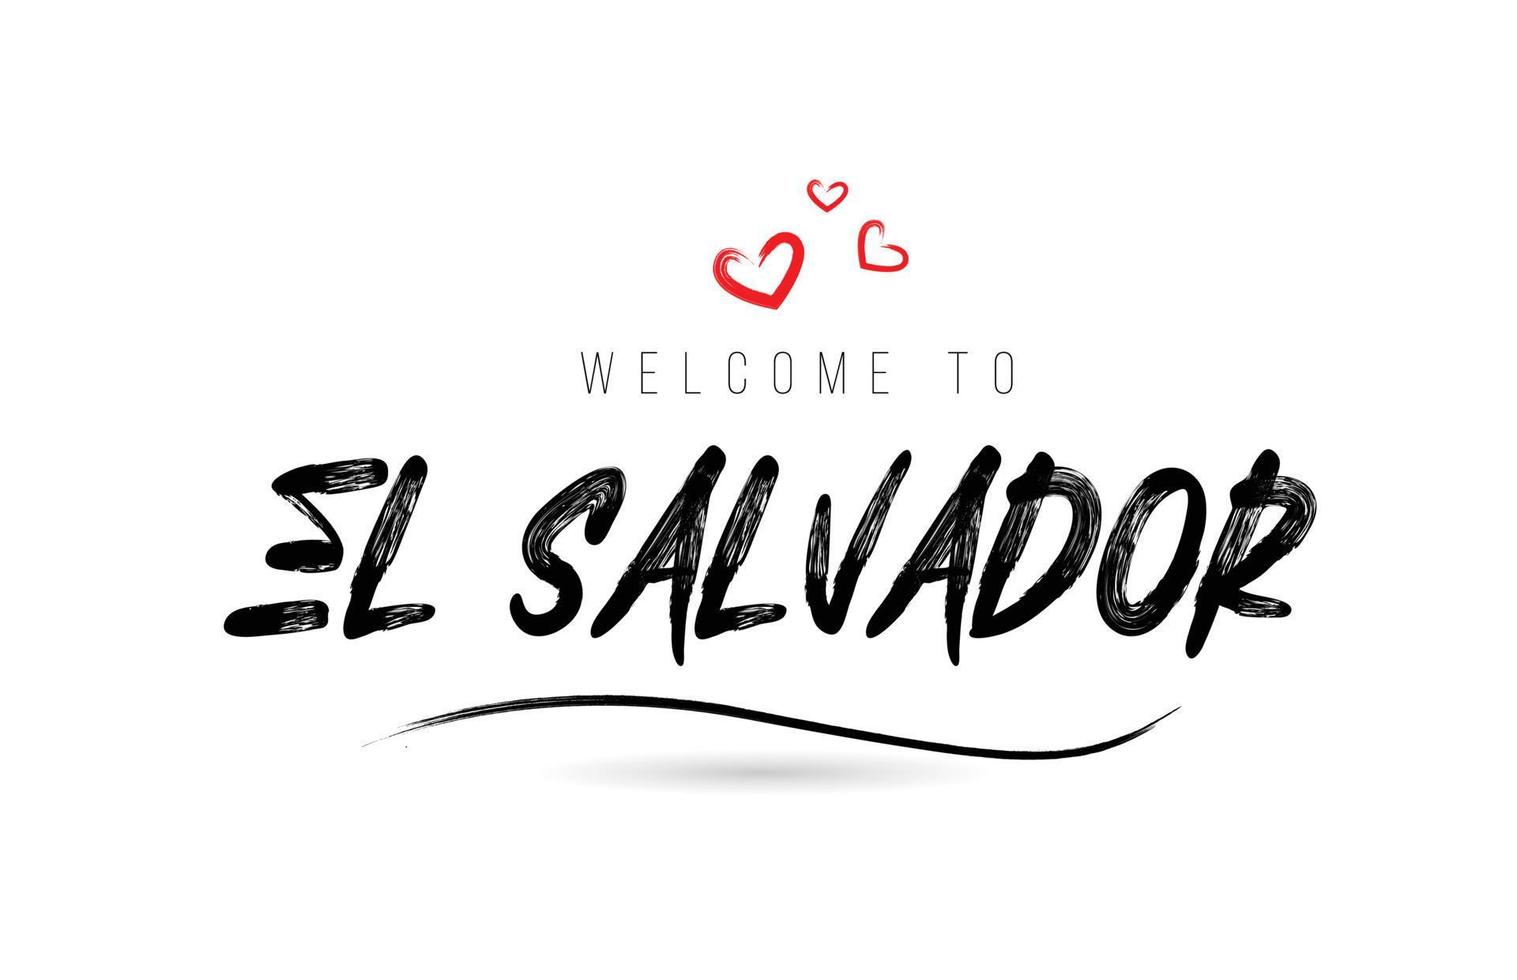 Welcome to SALVADOR country text typography with red love heart and black name vector